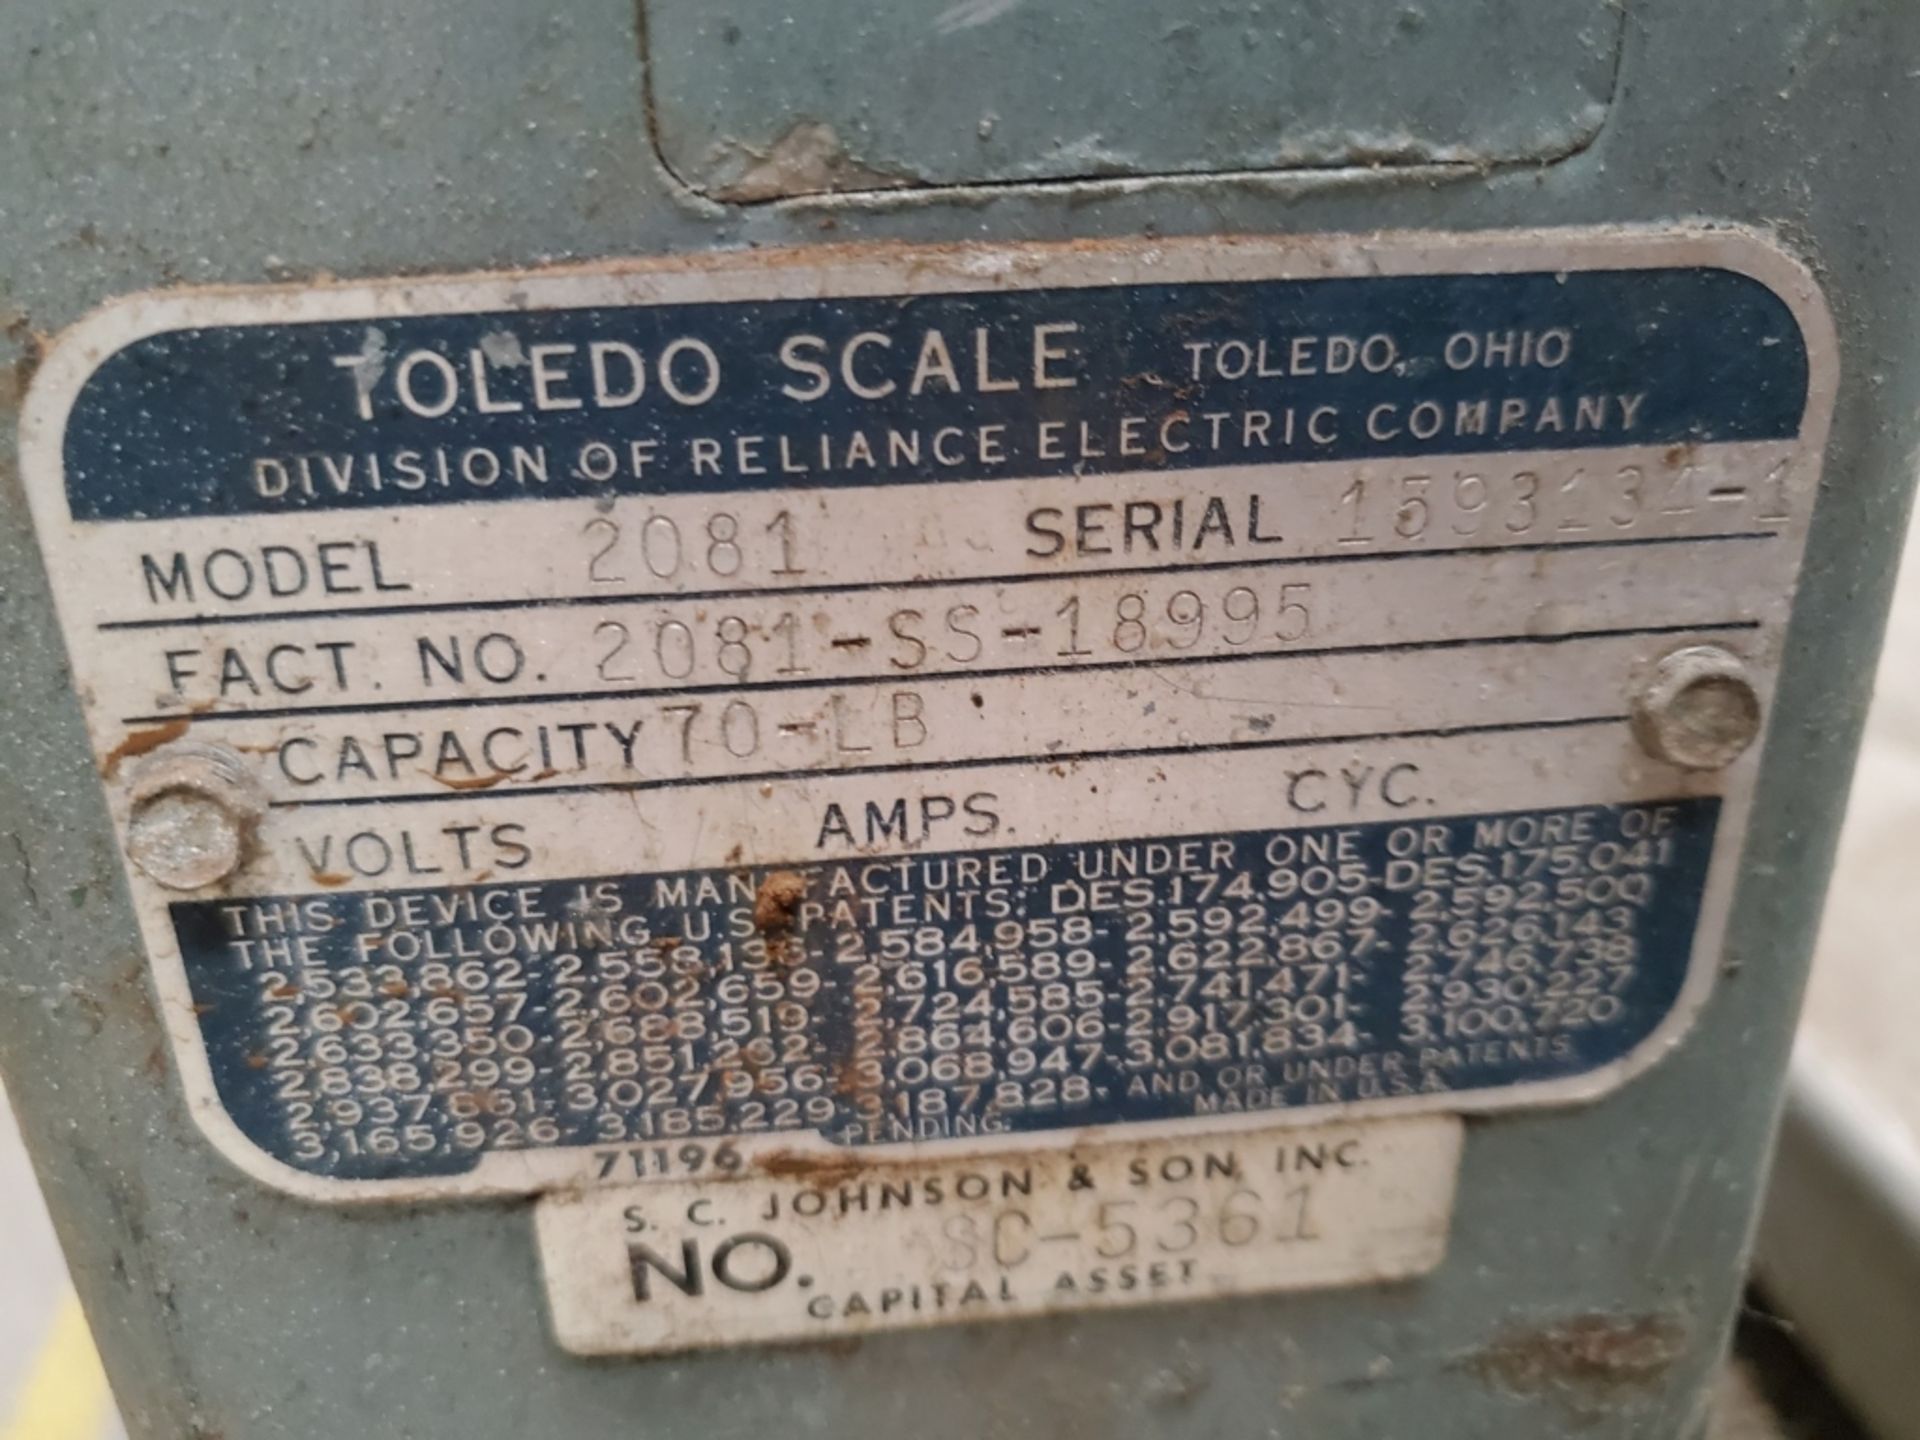 Toledo Scale Model 2081 70lbs Capacity Dial Scale - Image 7 of 7